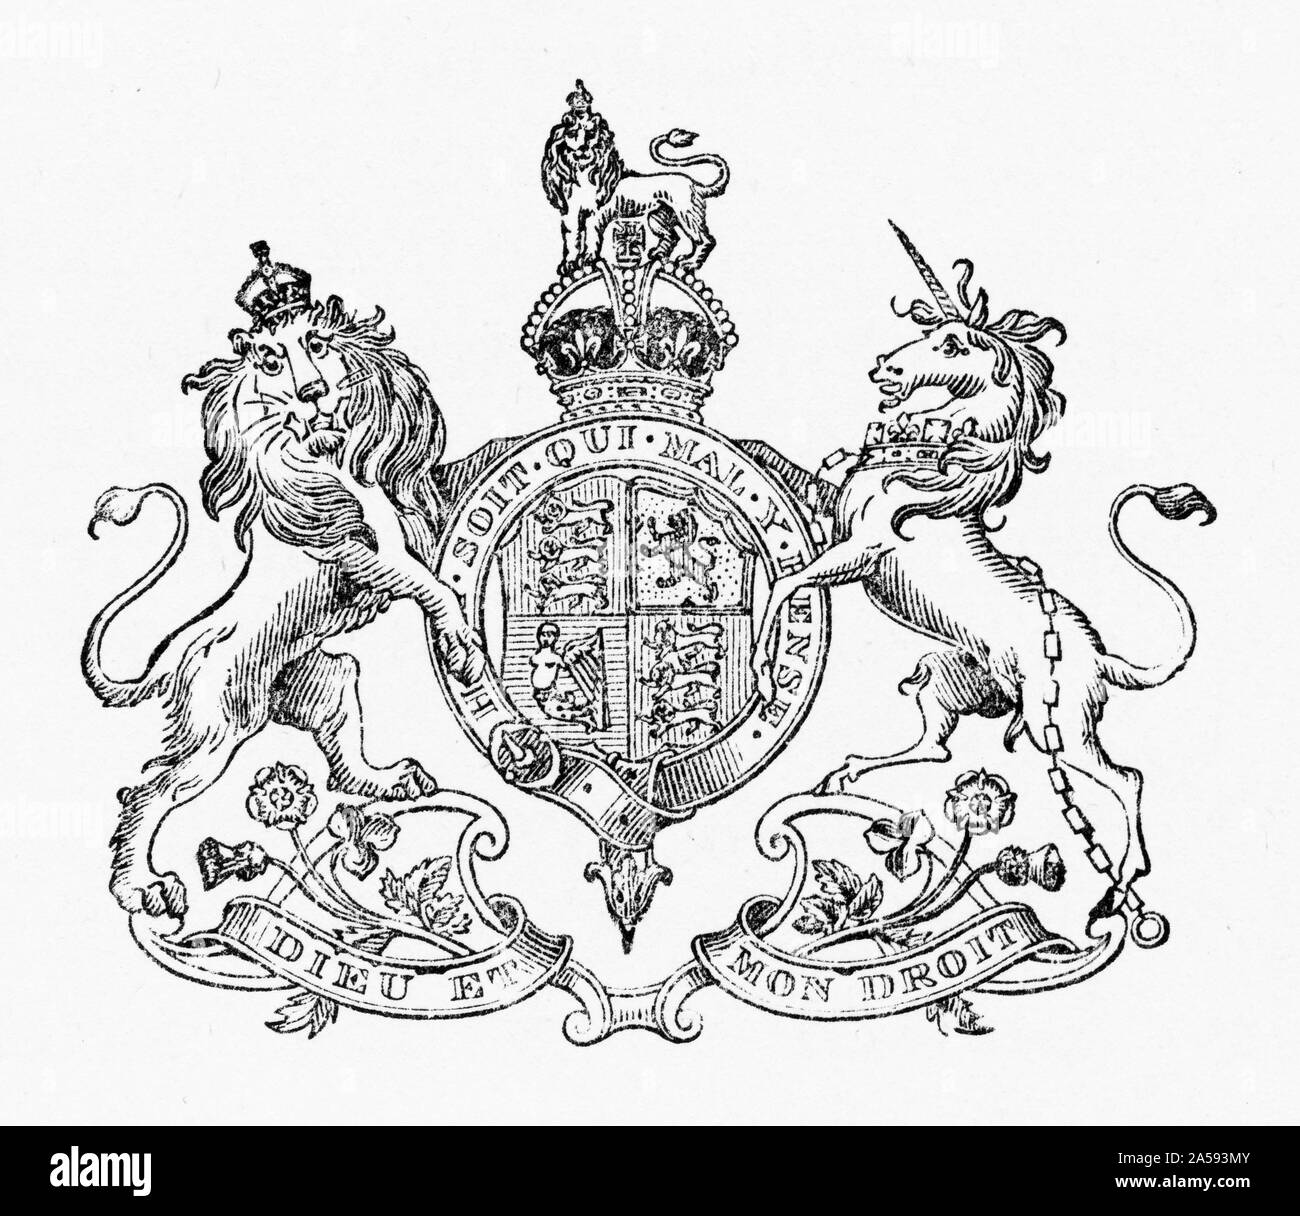 Engraving of the Coat of Arms for the Dominion of New Zealand . From a New Zealand Statutes book, 1930. Stock Photo